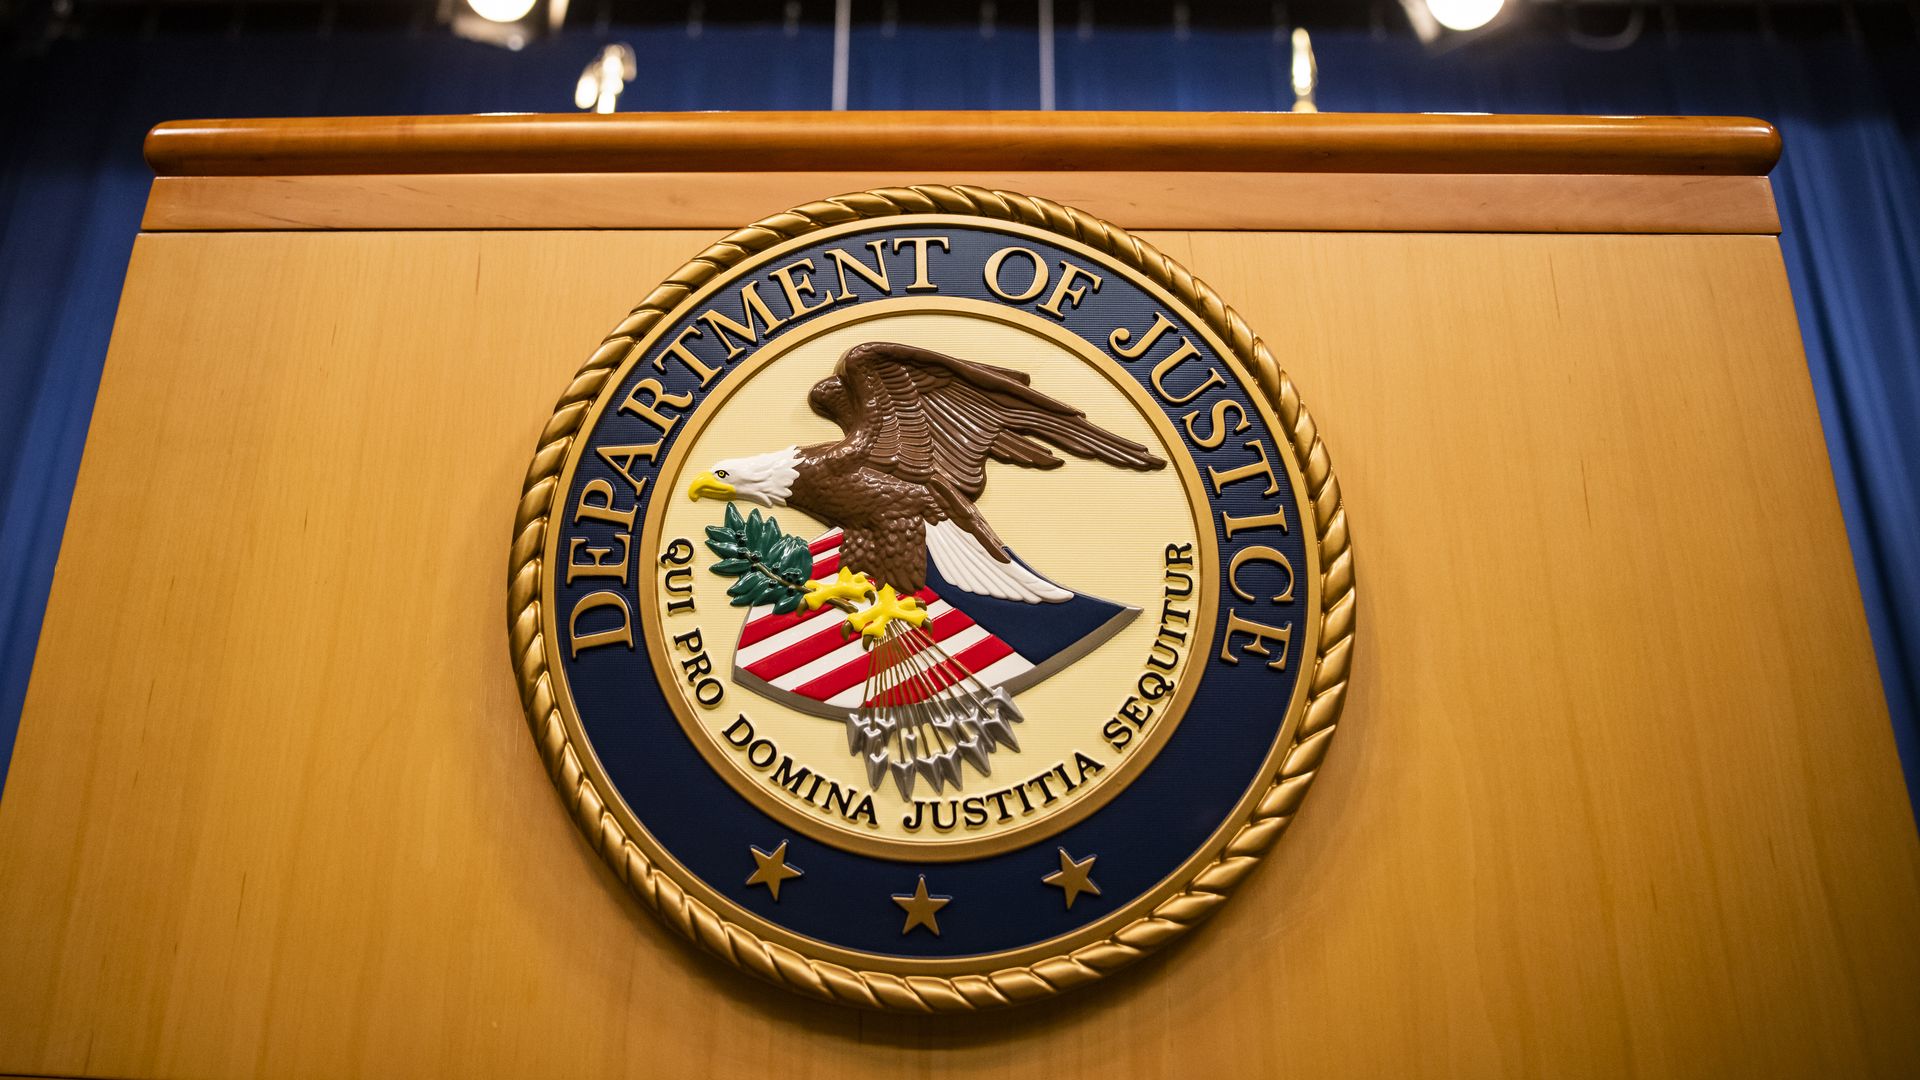 The Department of Justice seal on a podium.